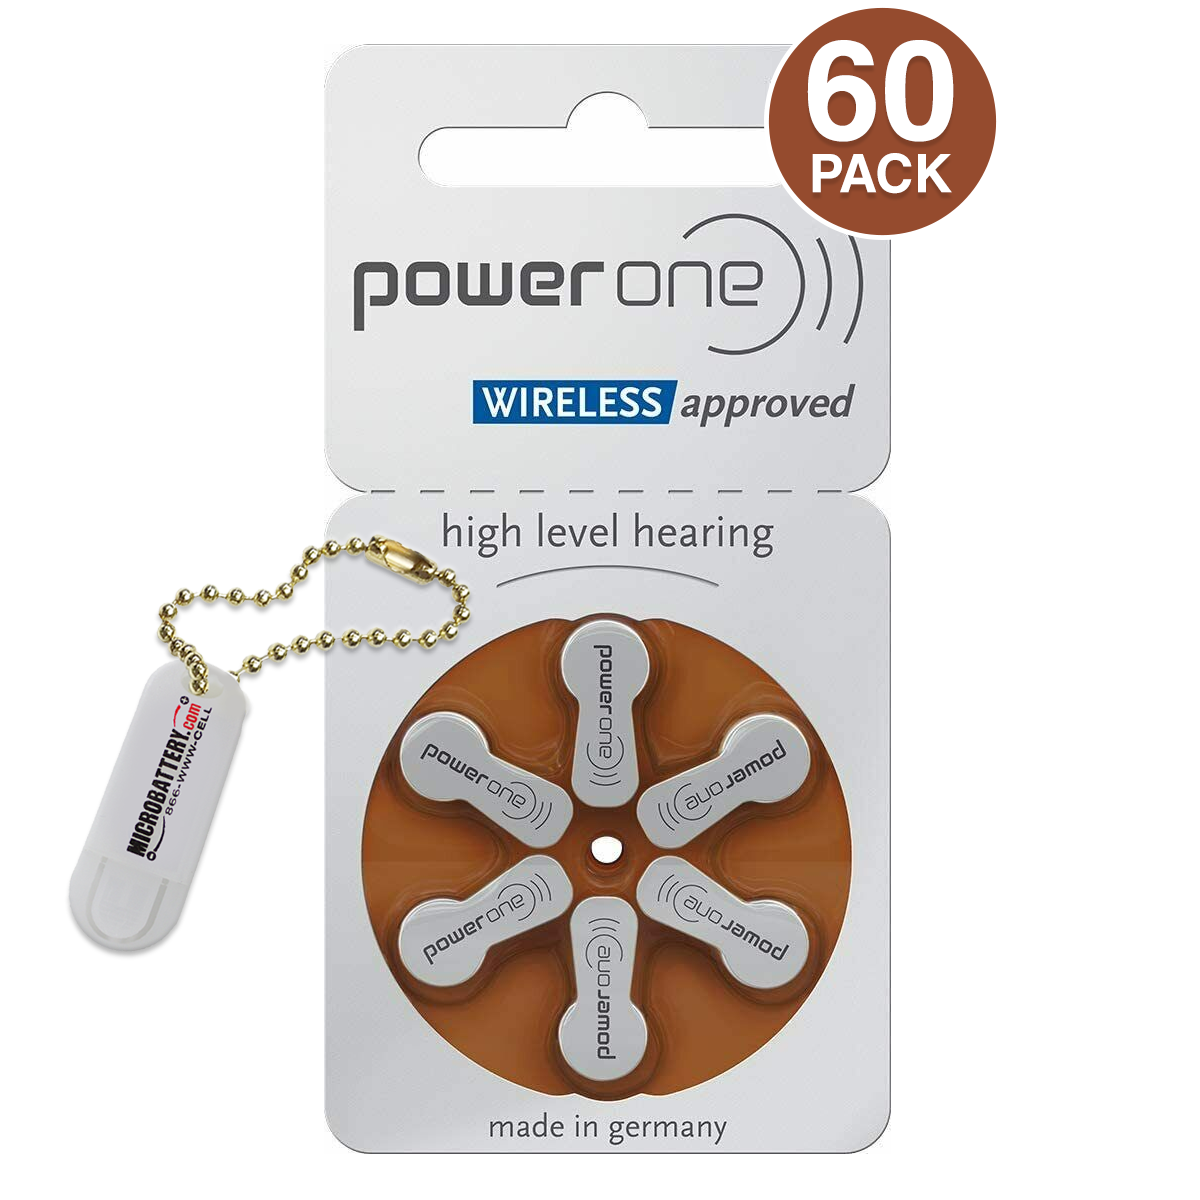 Power One Size 312, Pr41, P312 Hearing Aid Batteries (60 Batteries) + Keychain